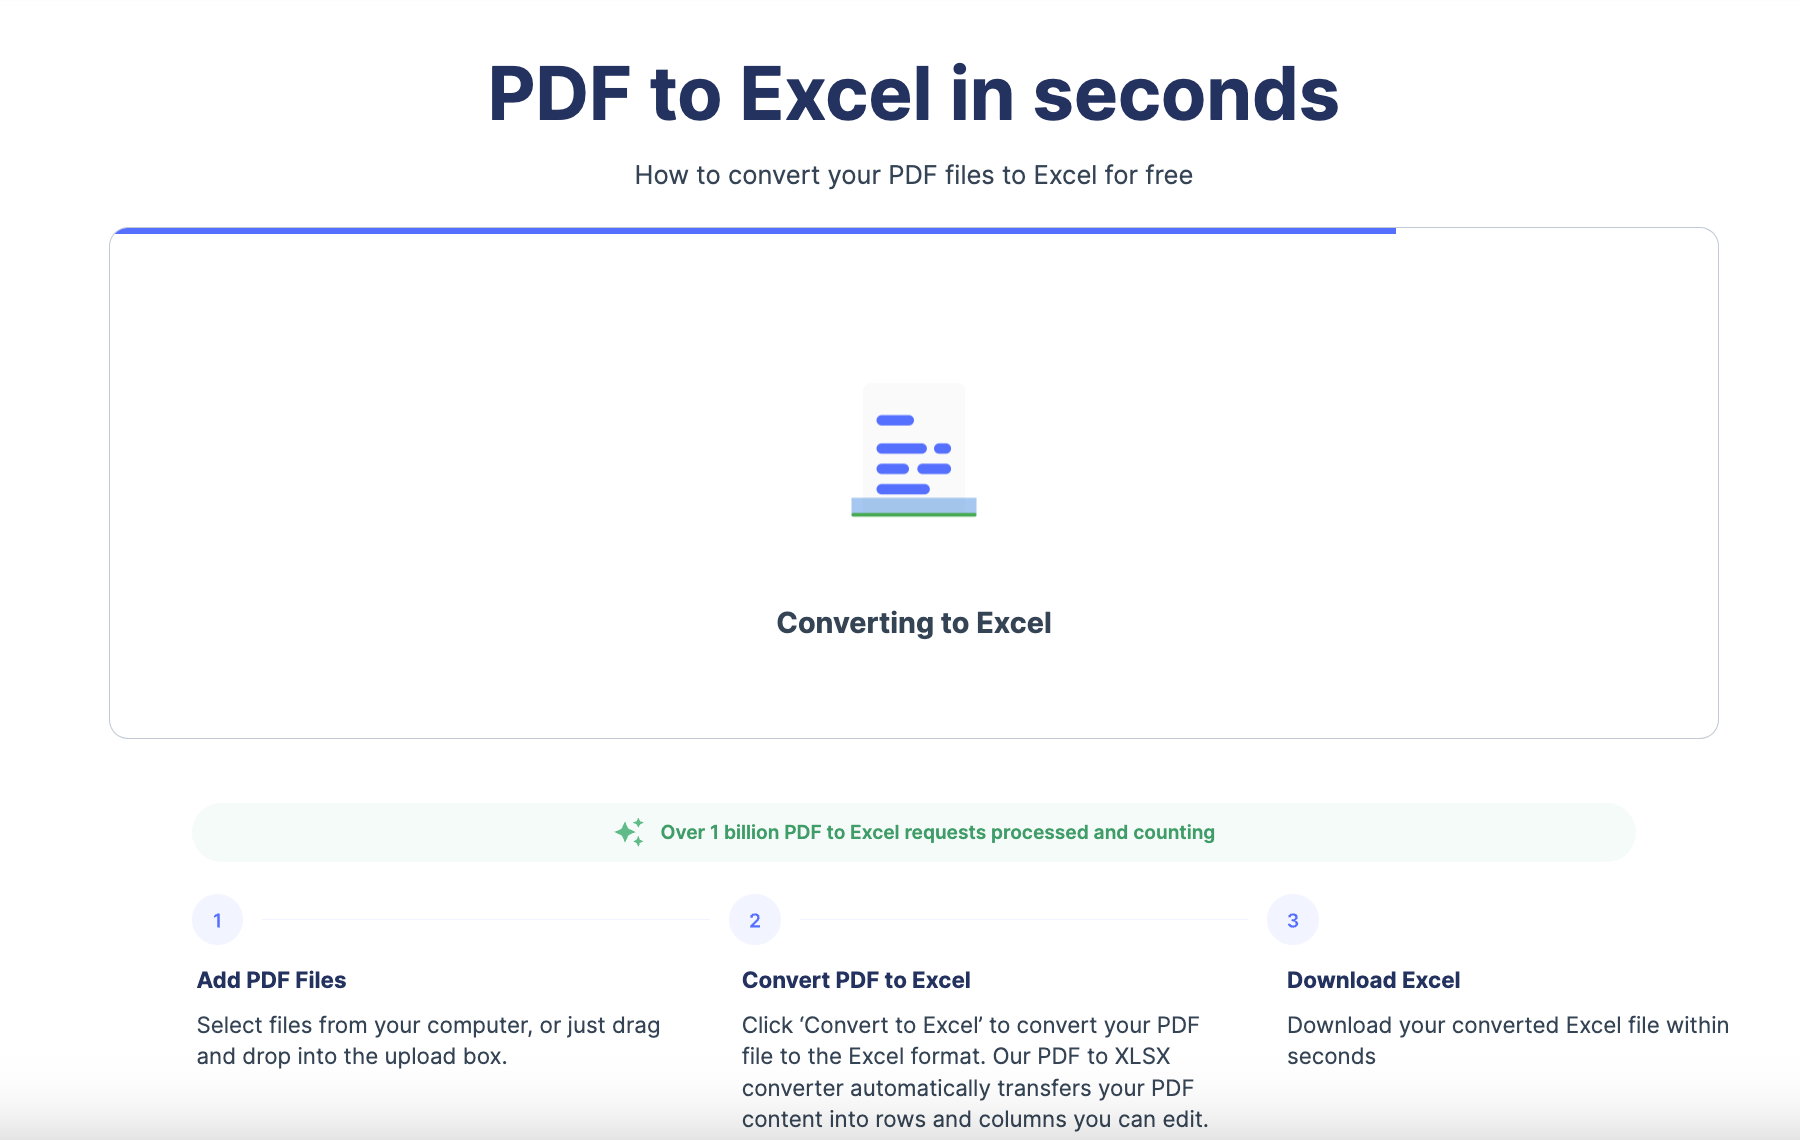 Nanonets will convert the PDF file to Excel within seconds